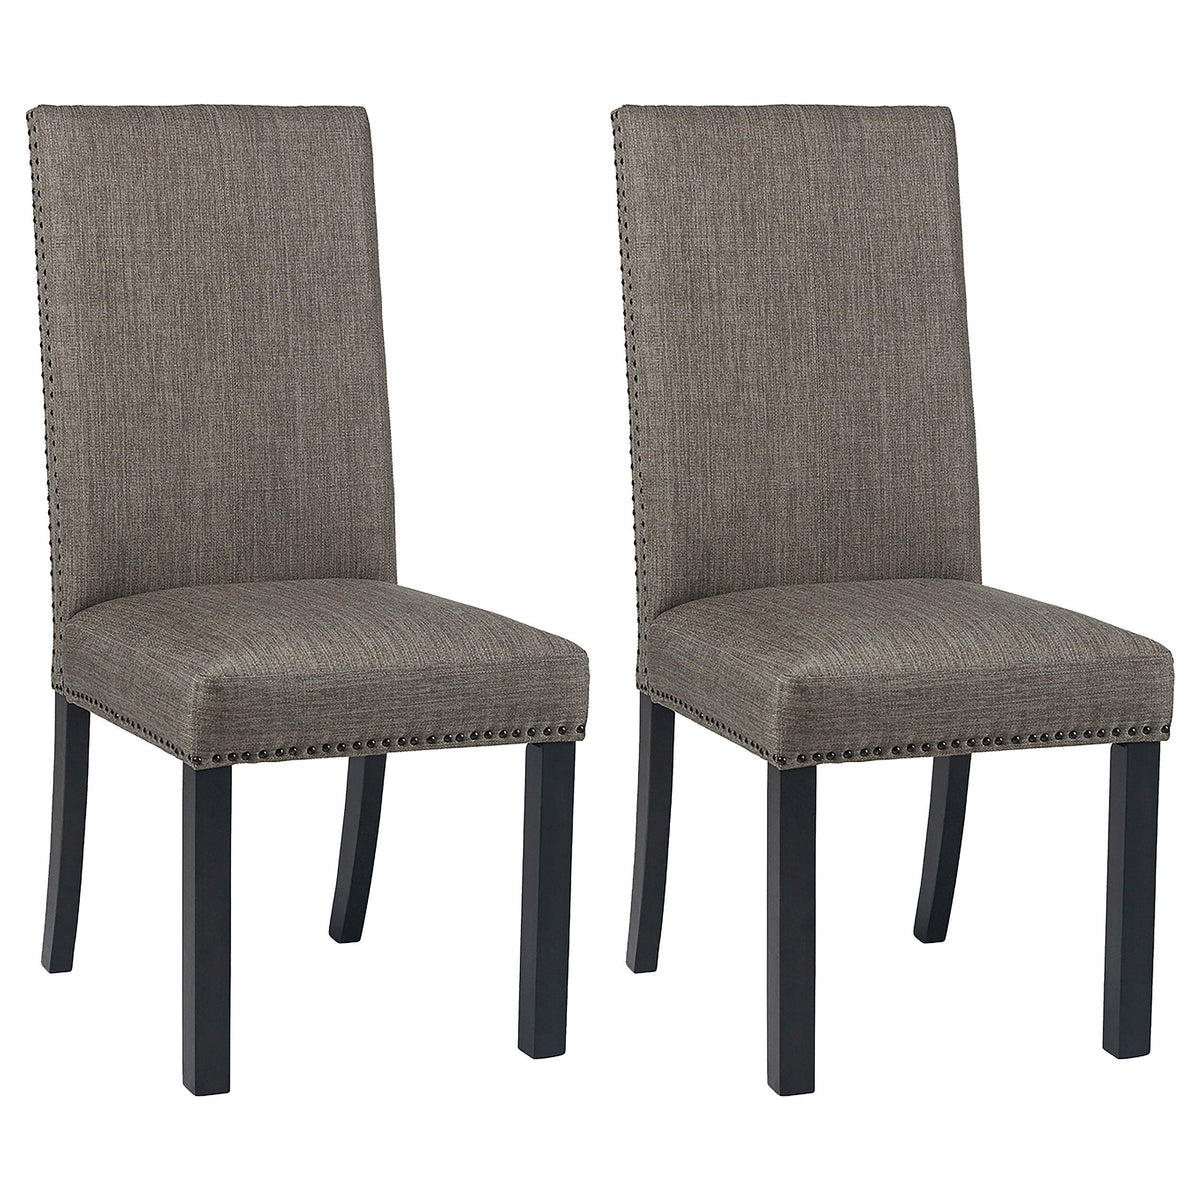 Hubbard Upholstered Side Chairs Charcoal (Set of 2)  Half Price Furniture